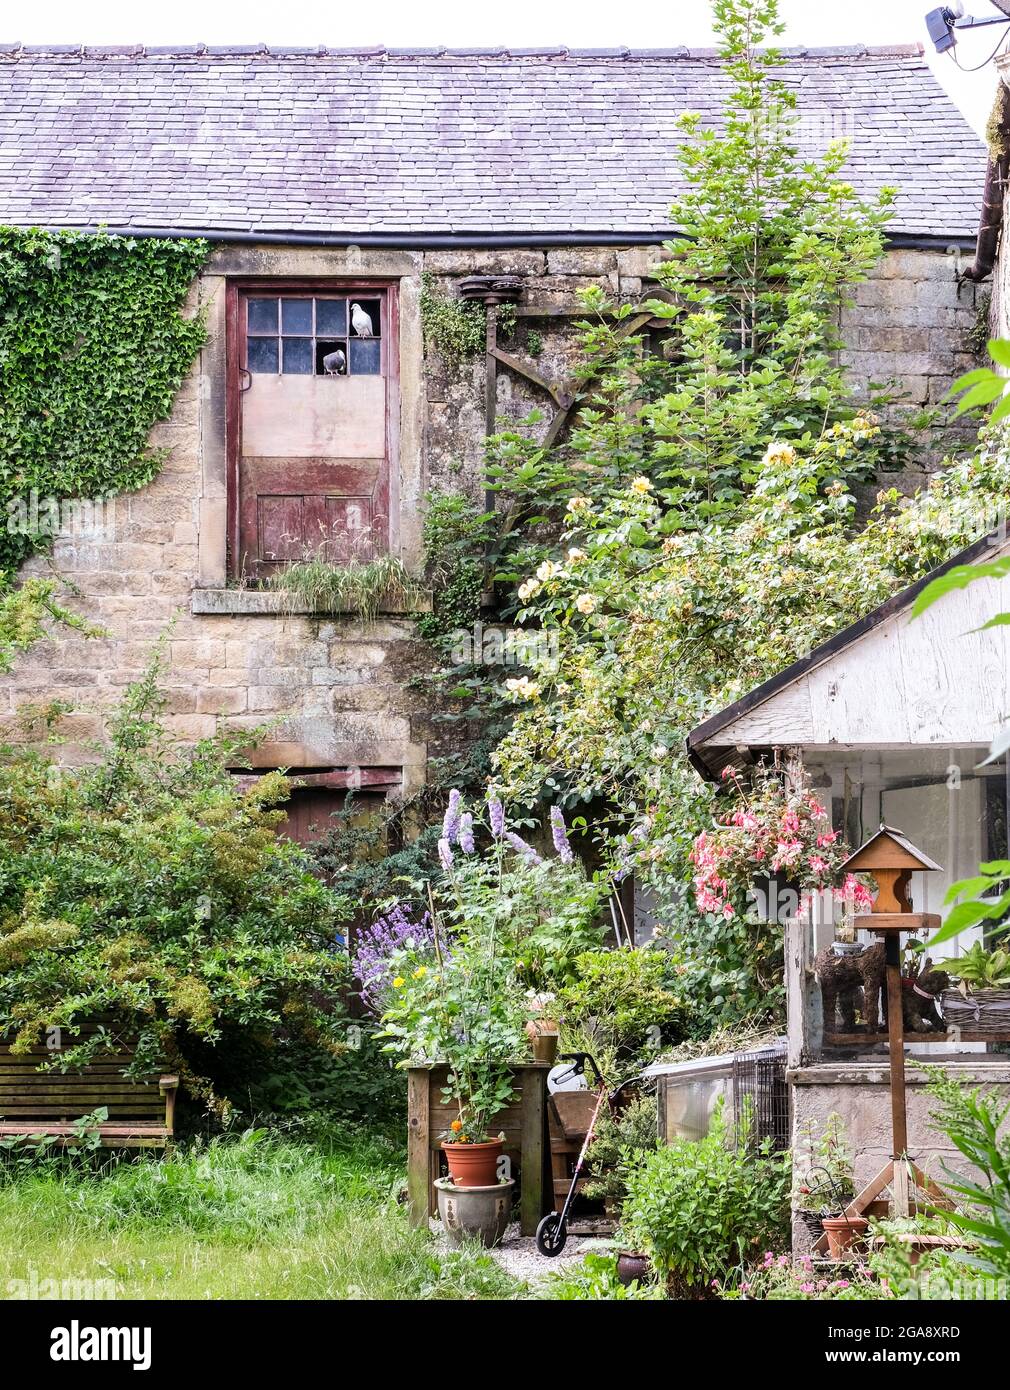 A cottage garden in the Derbyshire plague village of Eyam. Colourful flowers stand against stone built walling. Stock Photo